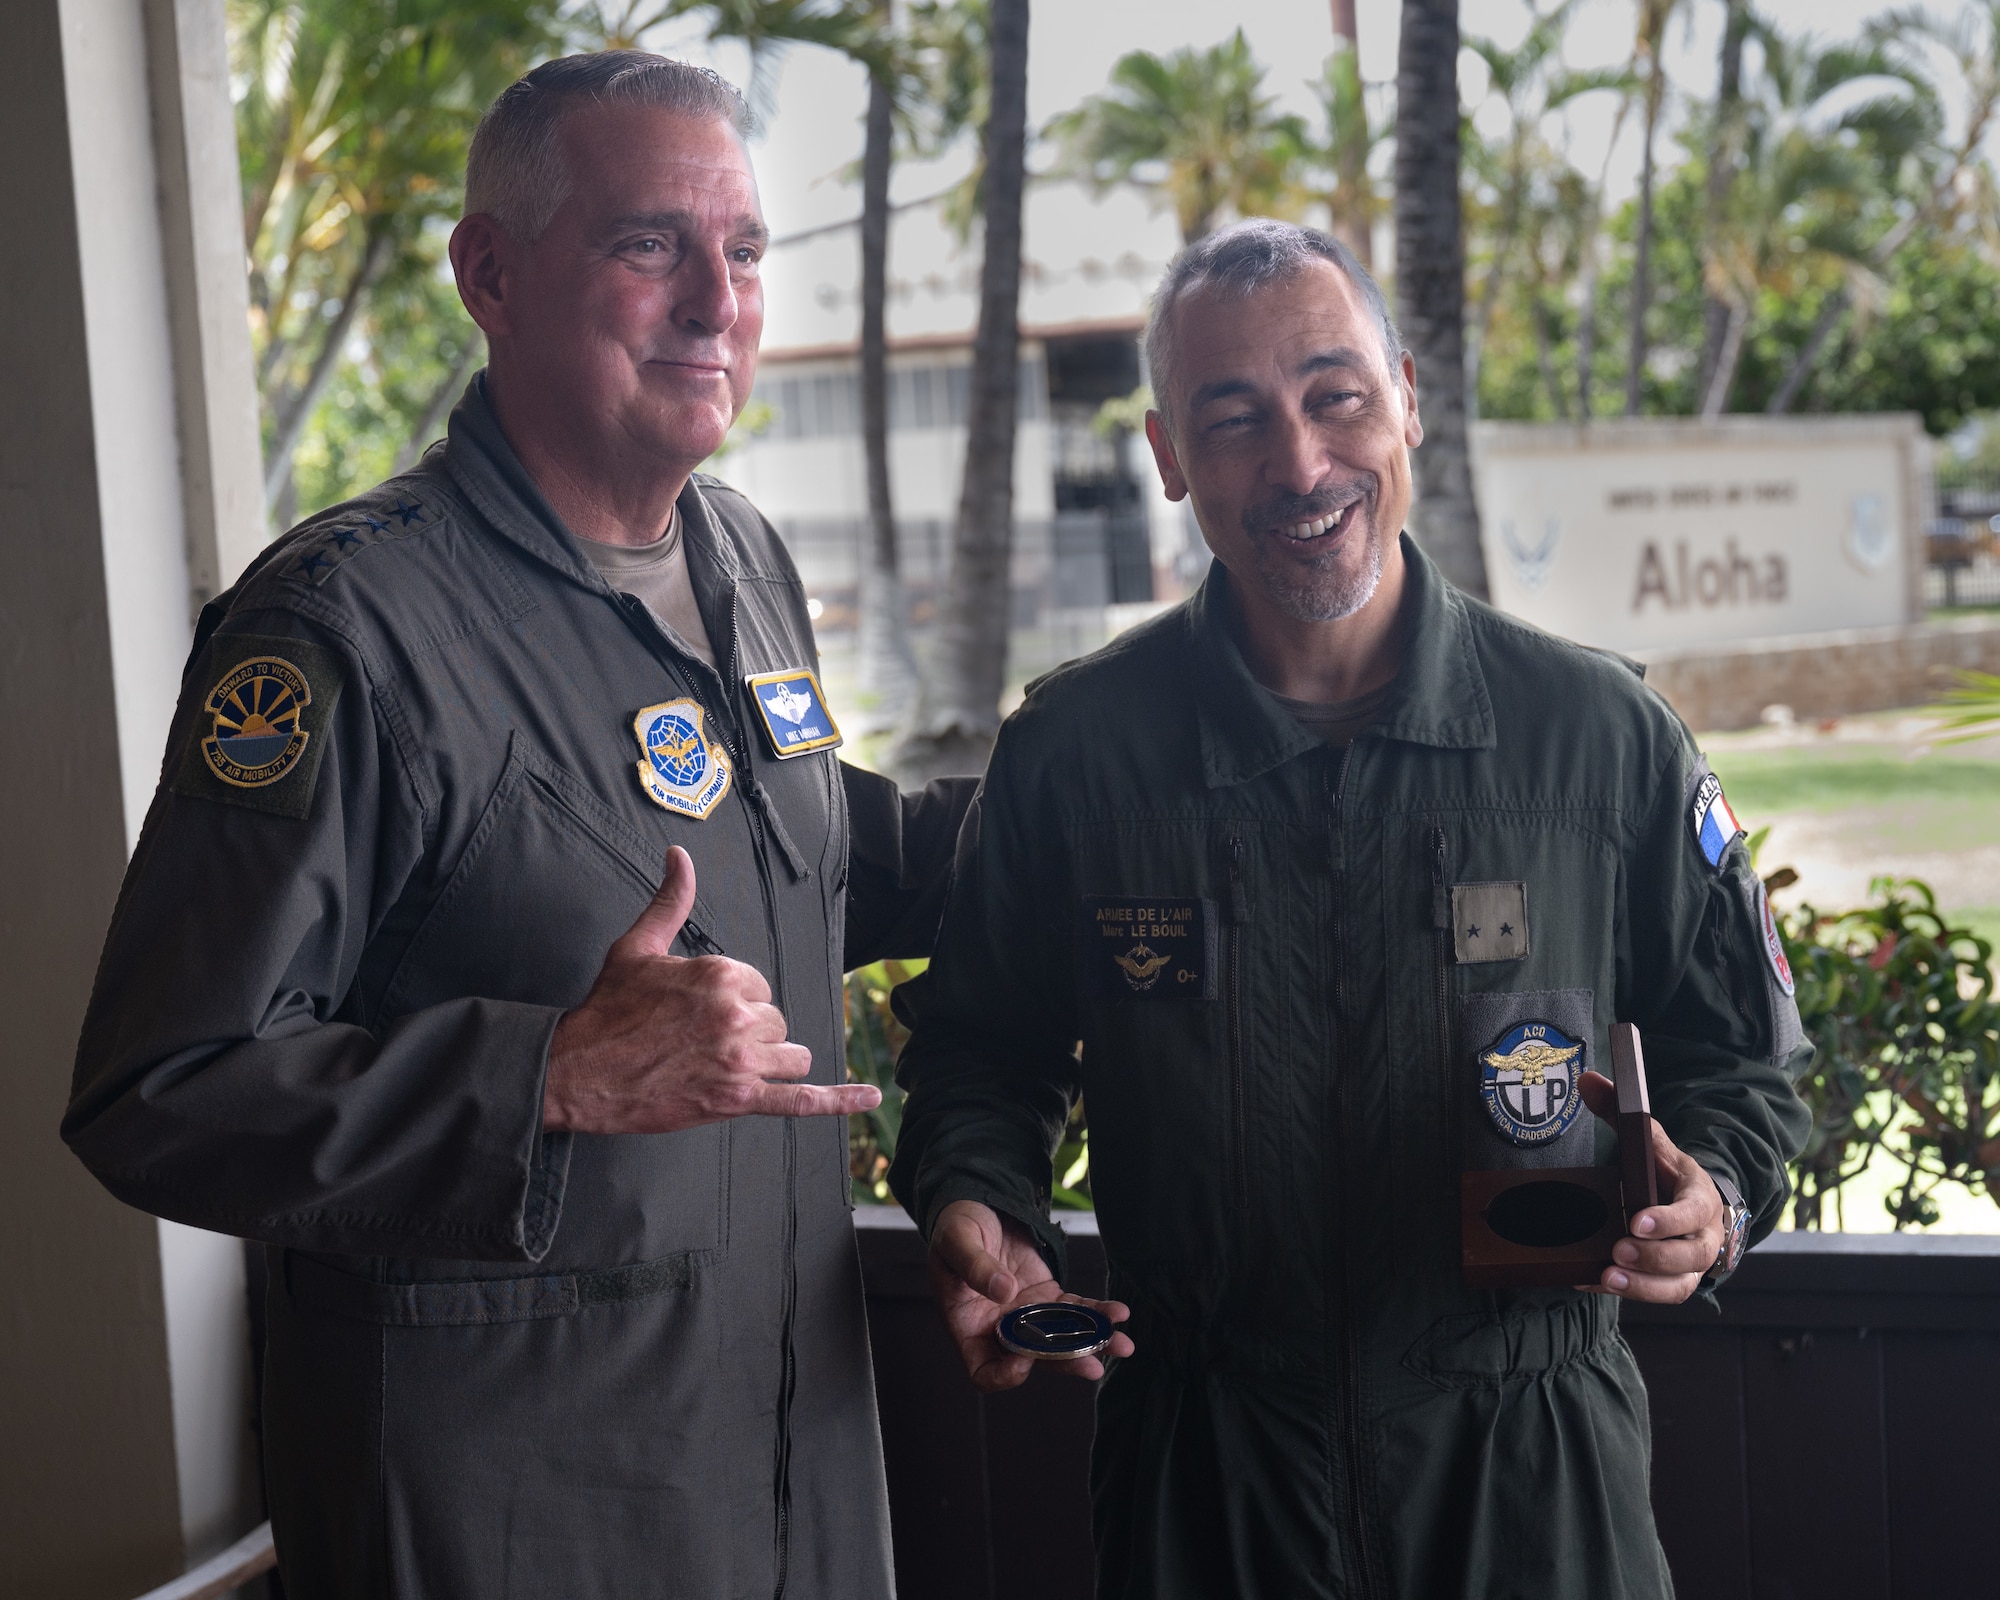 U.S. Air Force General Mike Minihan, Air Mobility Command commander, and Armee de l’Air général et de l'Espace de brigade Marc Le Bouil, chief of the Pégase Mission, met to discuss coalition interoperability in the Indo-Pacific at Joint Base Pearl Harbor-Hickam on July 10, 2023. A multinational endeavor, MG23 featured seven participating countries -- Australia,  Canada, France, Japan, New Zealand, the United Kingdom, and the United States.  (U.S. Air Force photo by Staff Sgt. Ryan Brooks)